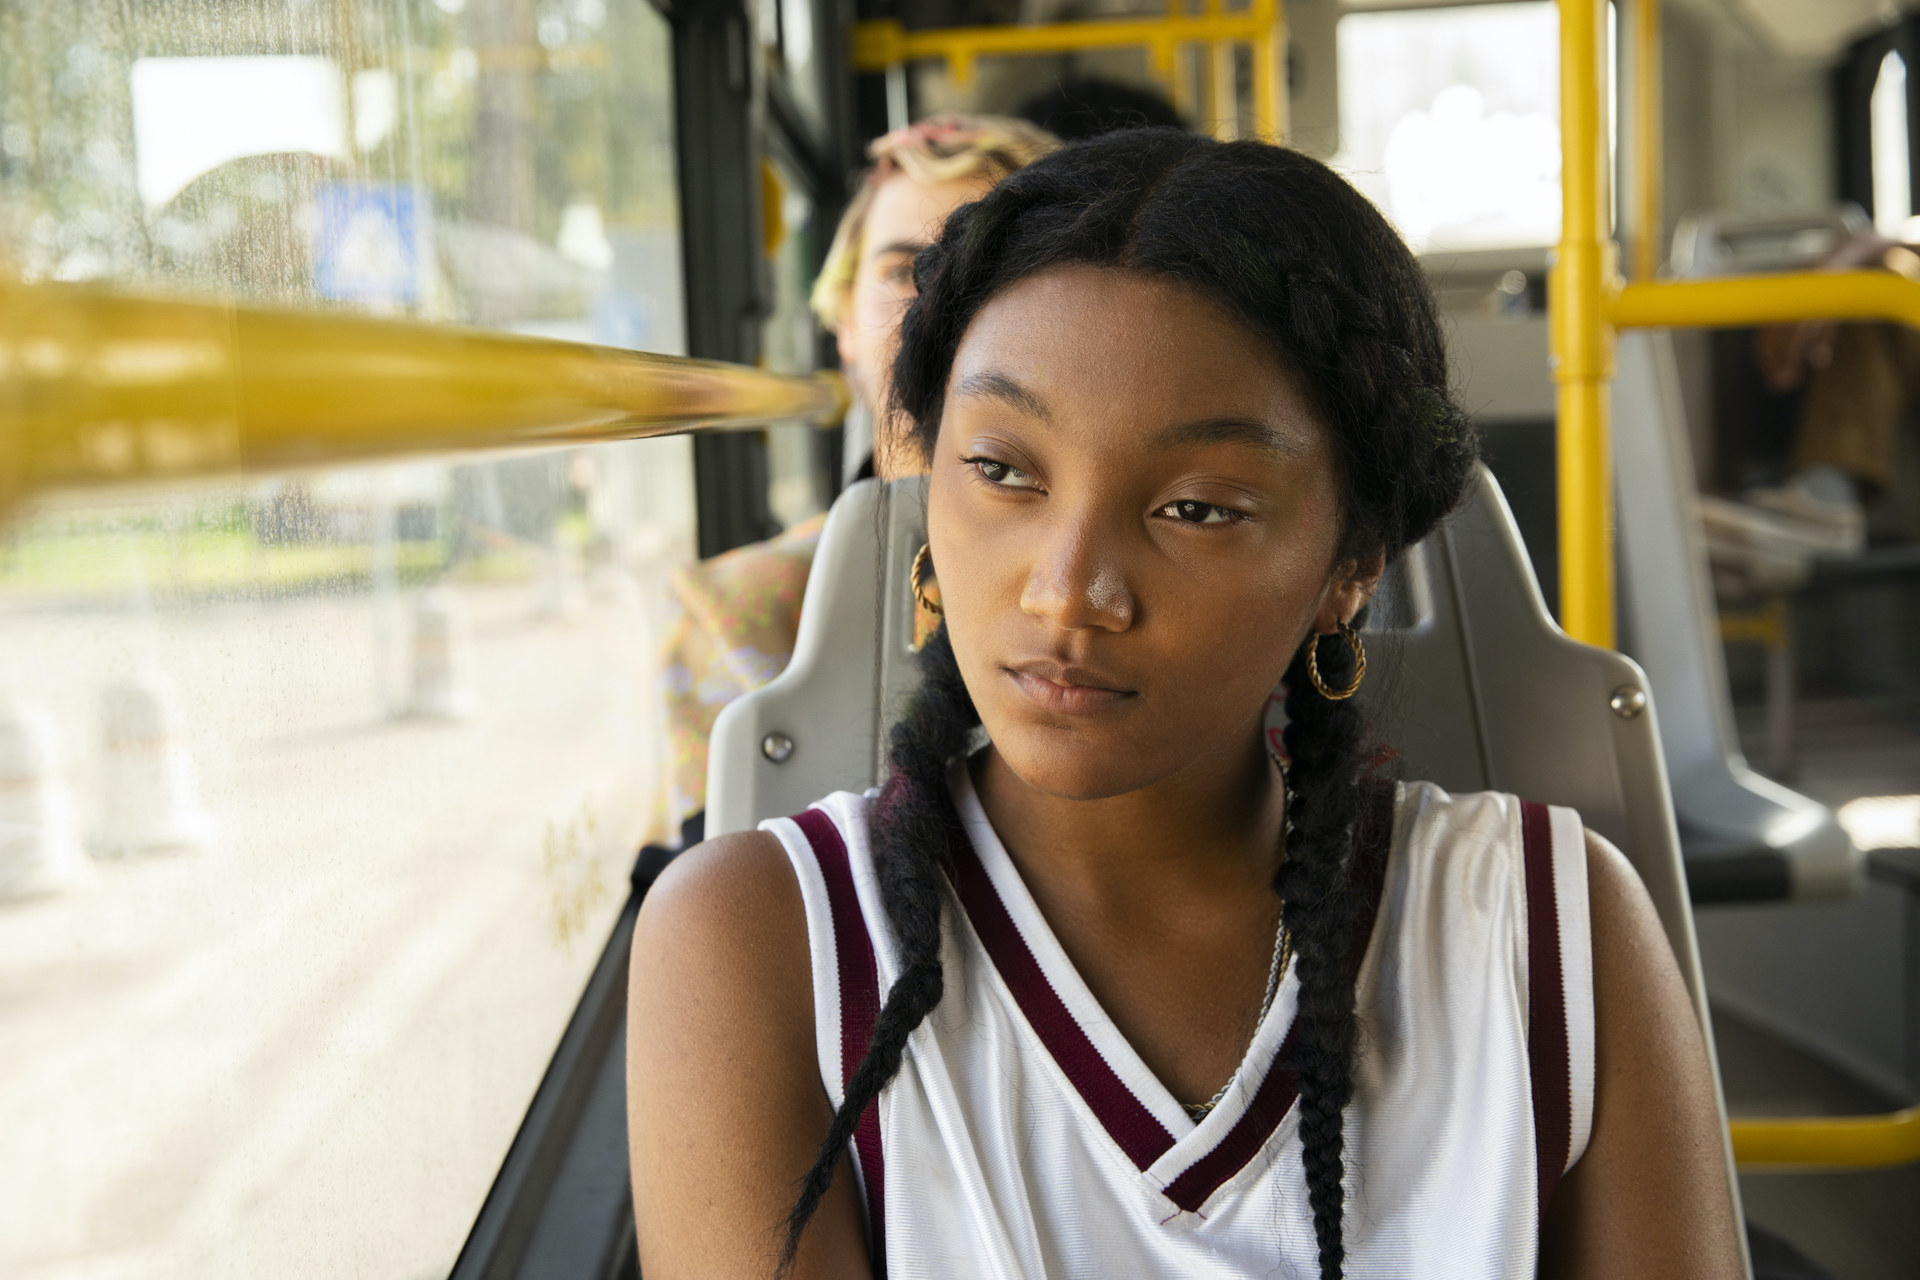 A Black teenager sits on a bus looking out the window